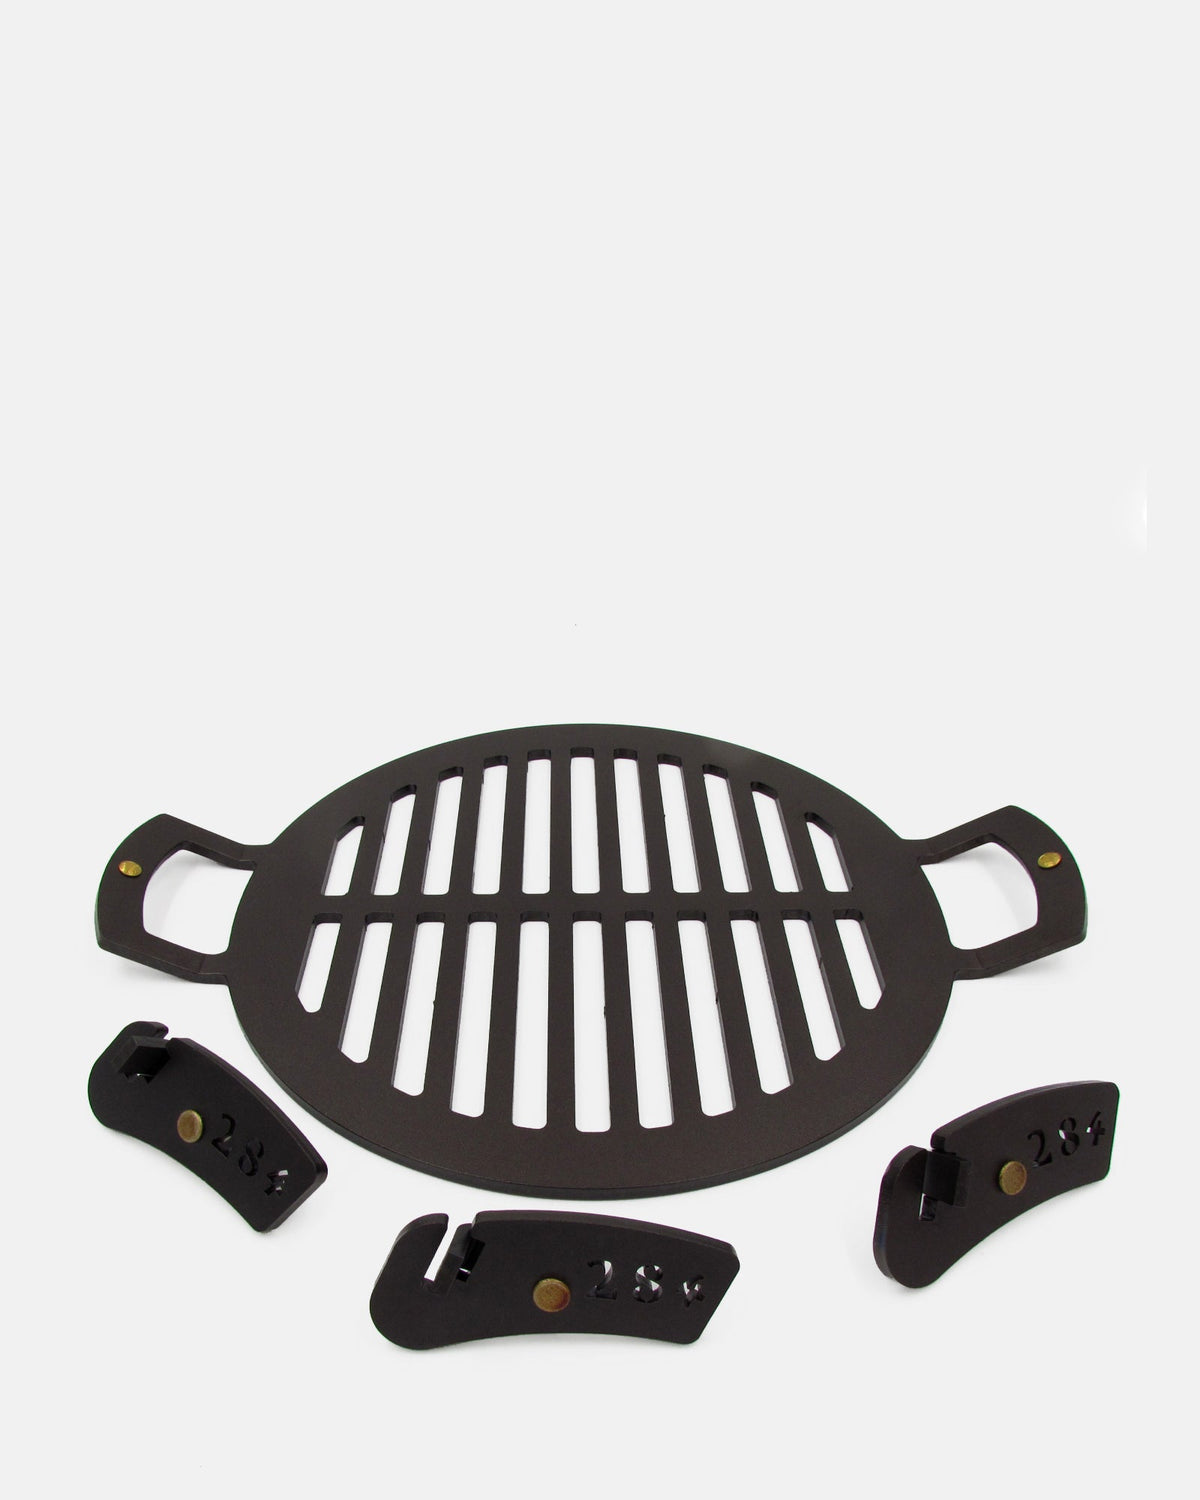 Black Iron 12 inch barbecue plate with short legs - BRIT LOCKER